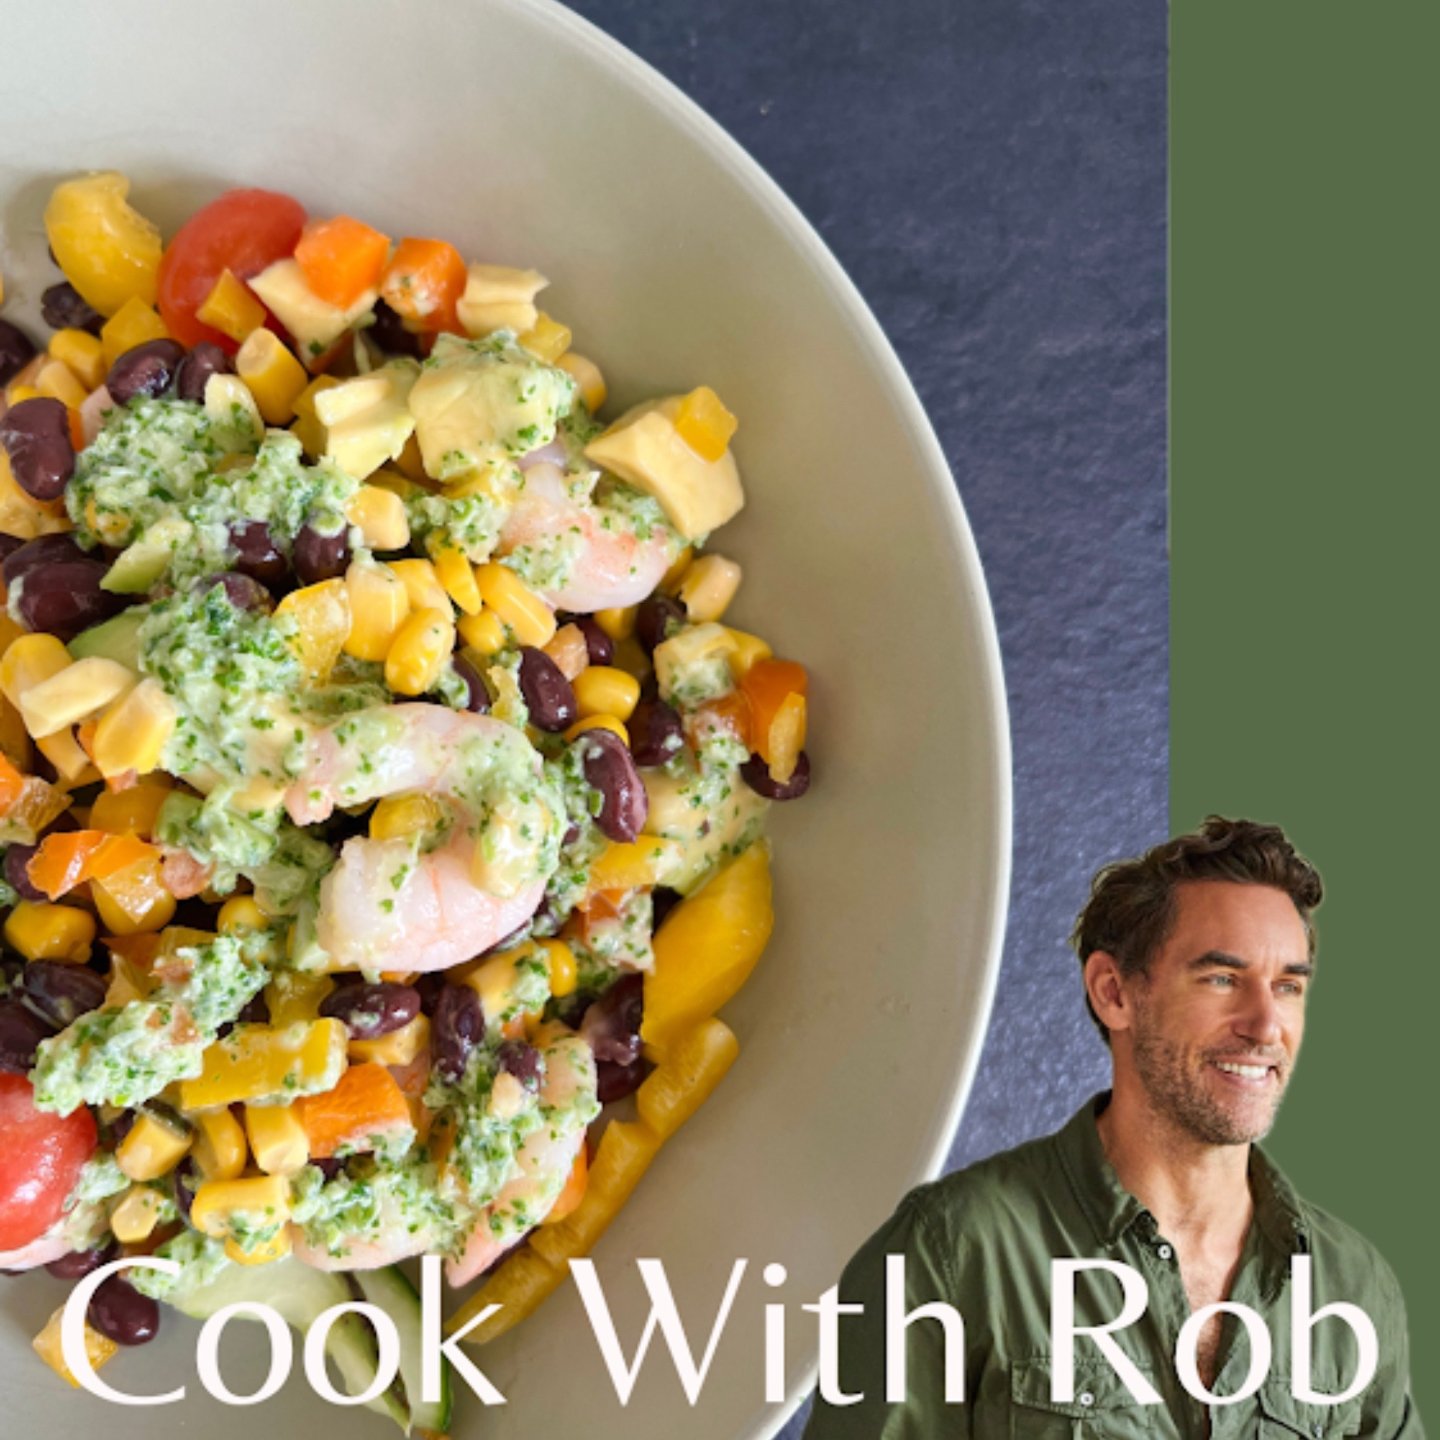 If you are looking for nutritious, simple and delicious recipes - head over and save these by expert @robhobsonnutritionist